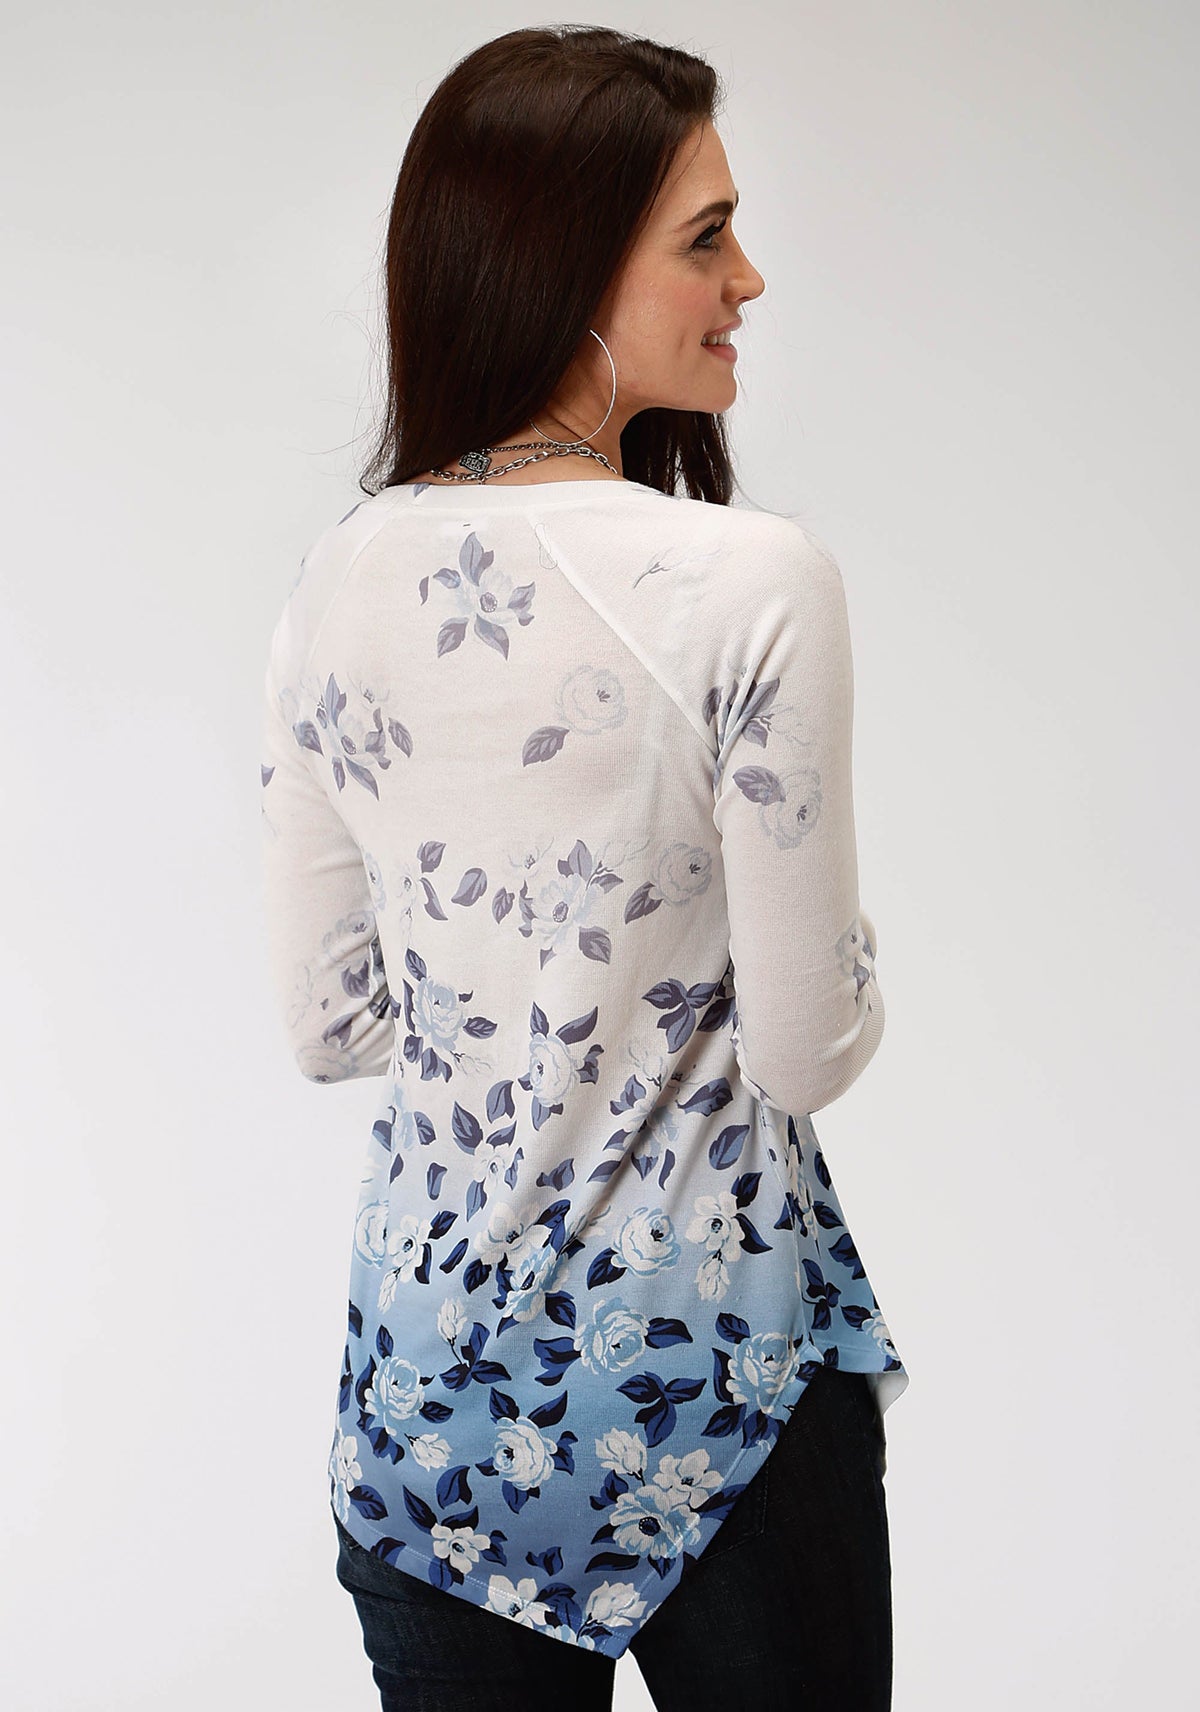 Roper Womens White And Blue Floral Print Long Sleeve Knit Top